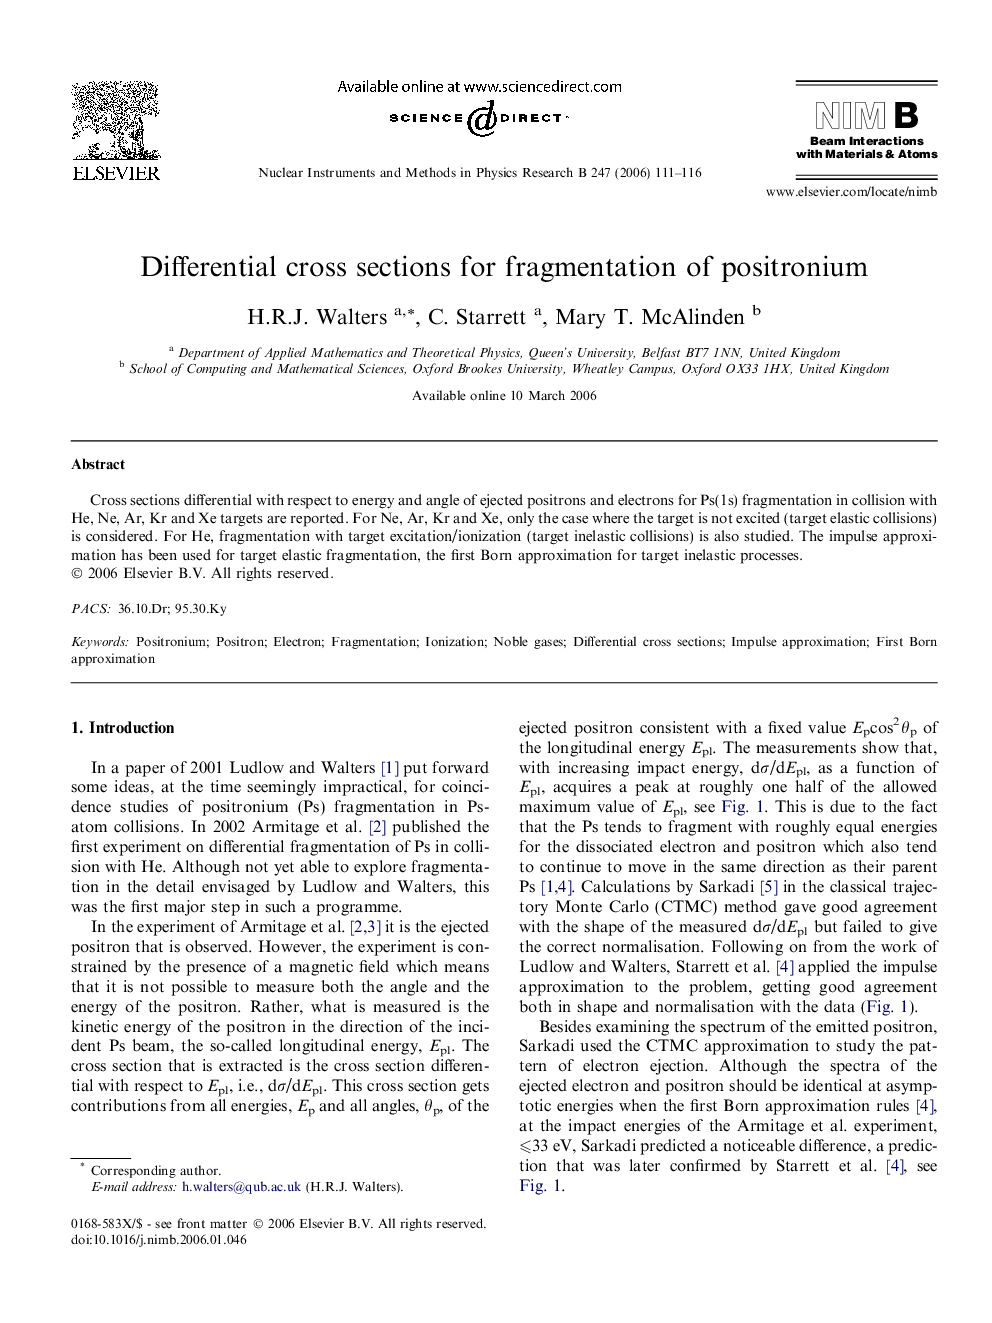 Differential cross sections for fragmentation of positronium